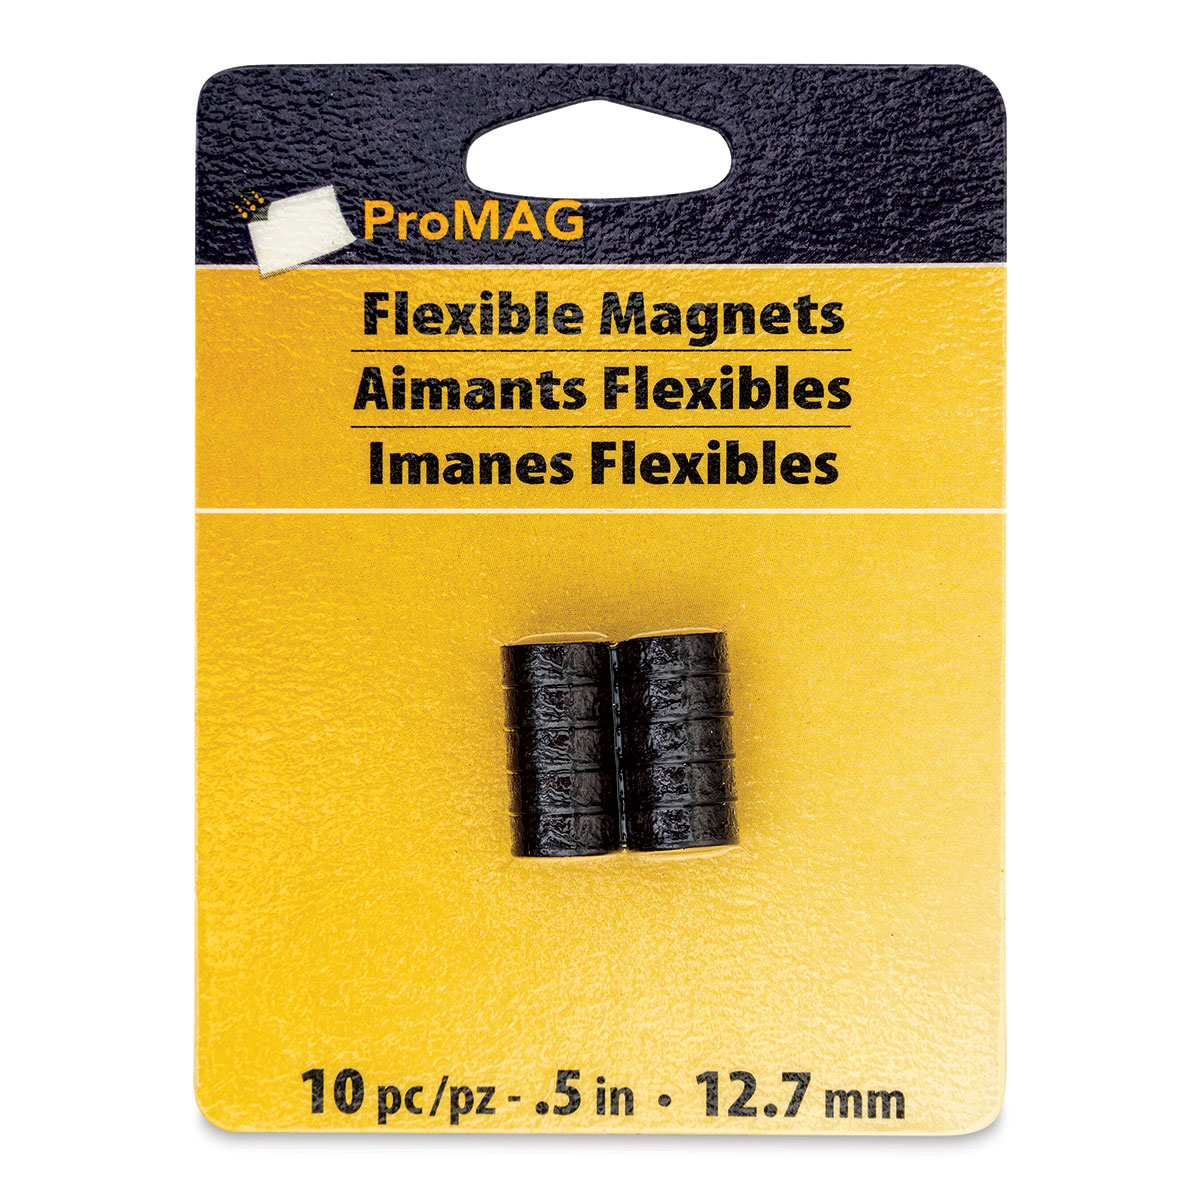 ProMag Adhesive Magnets